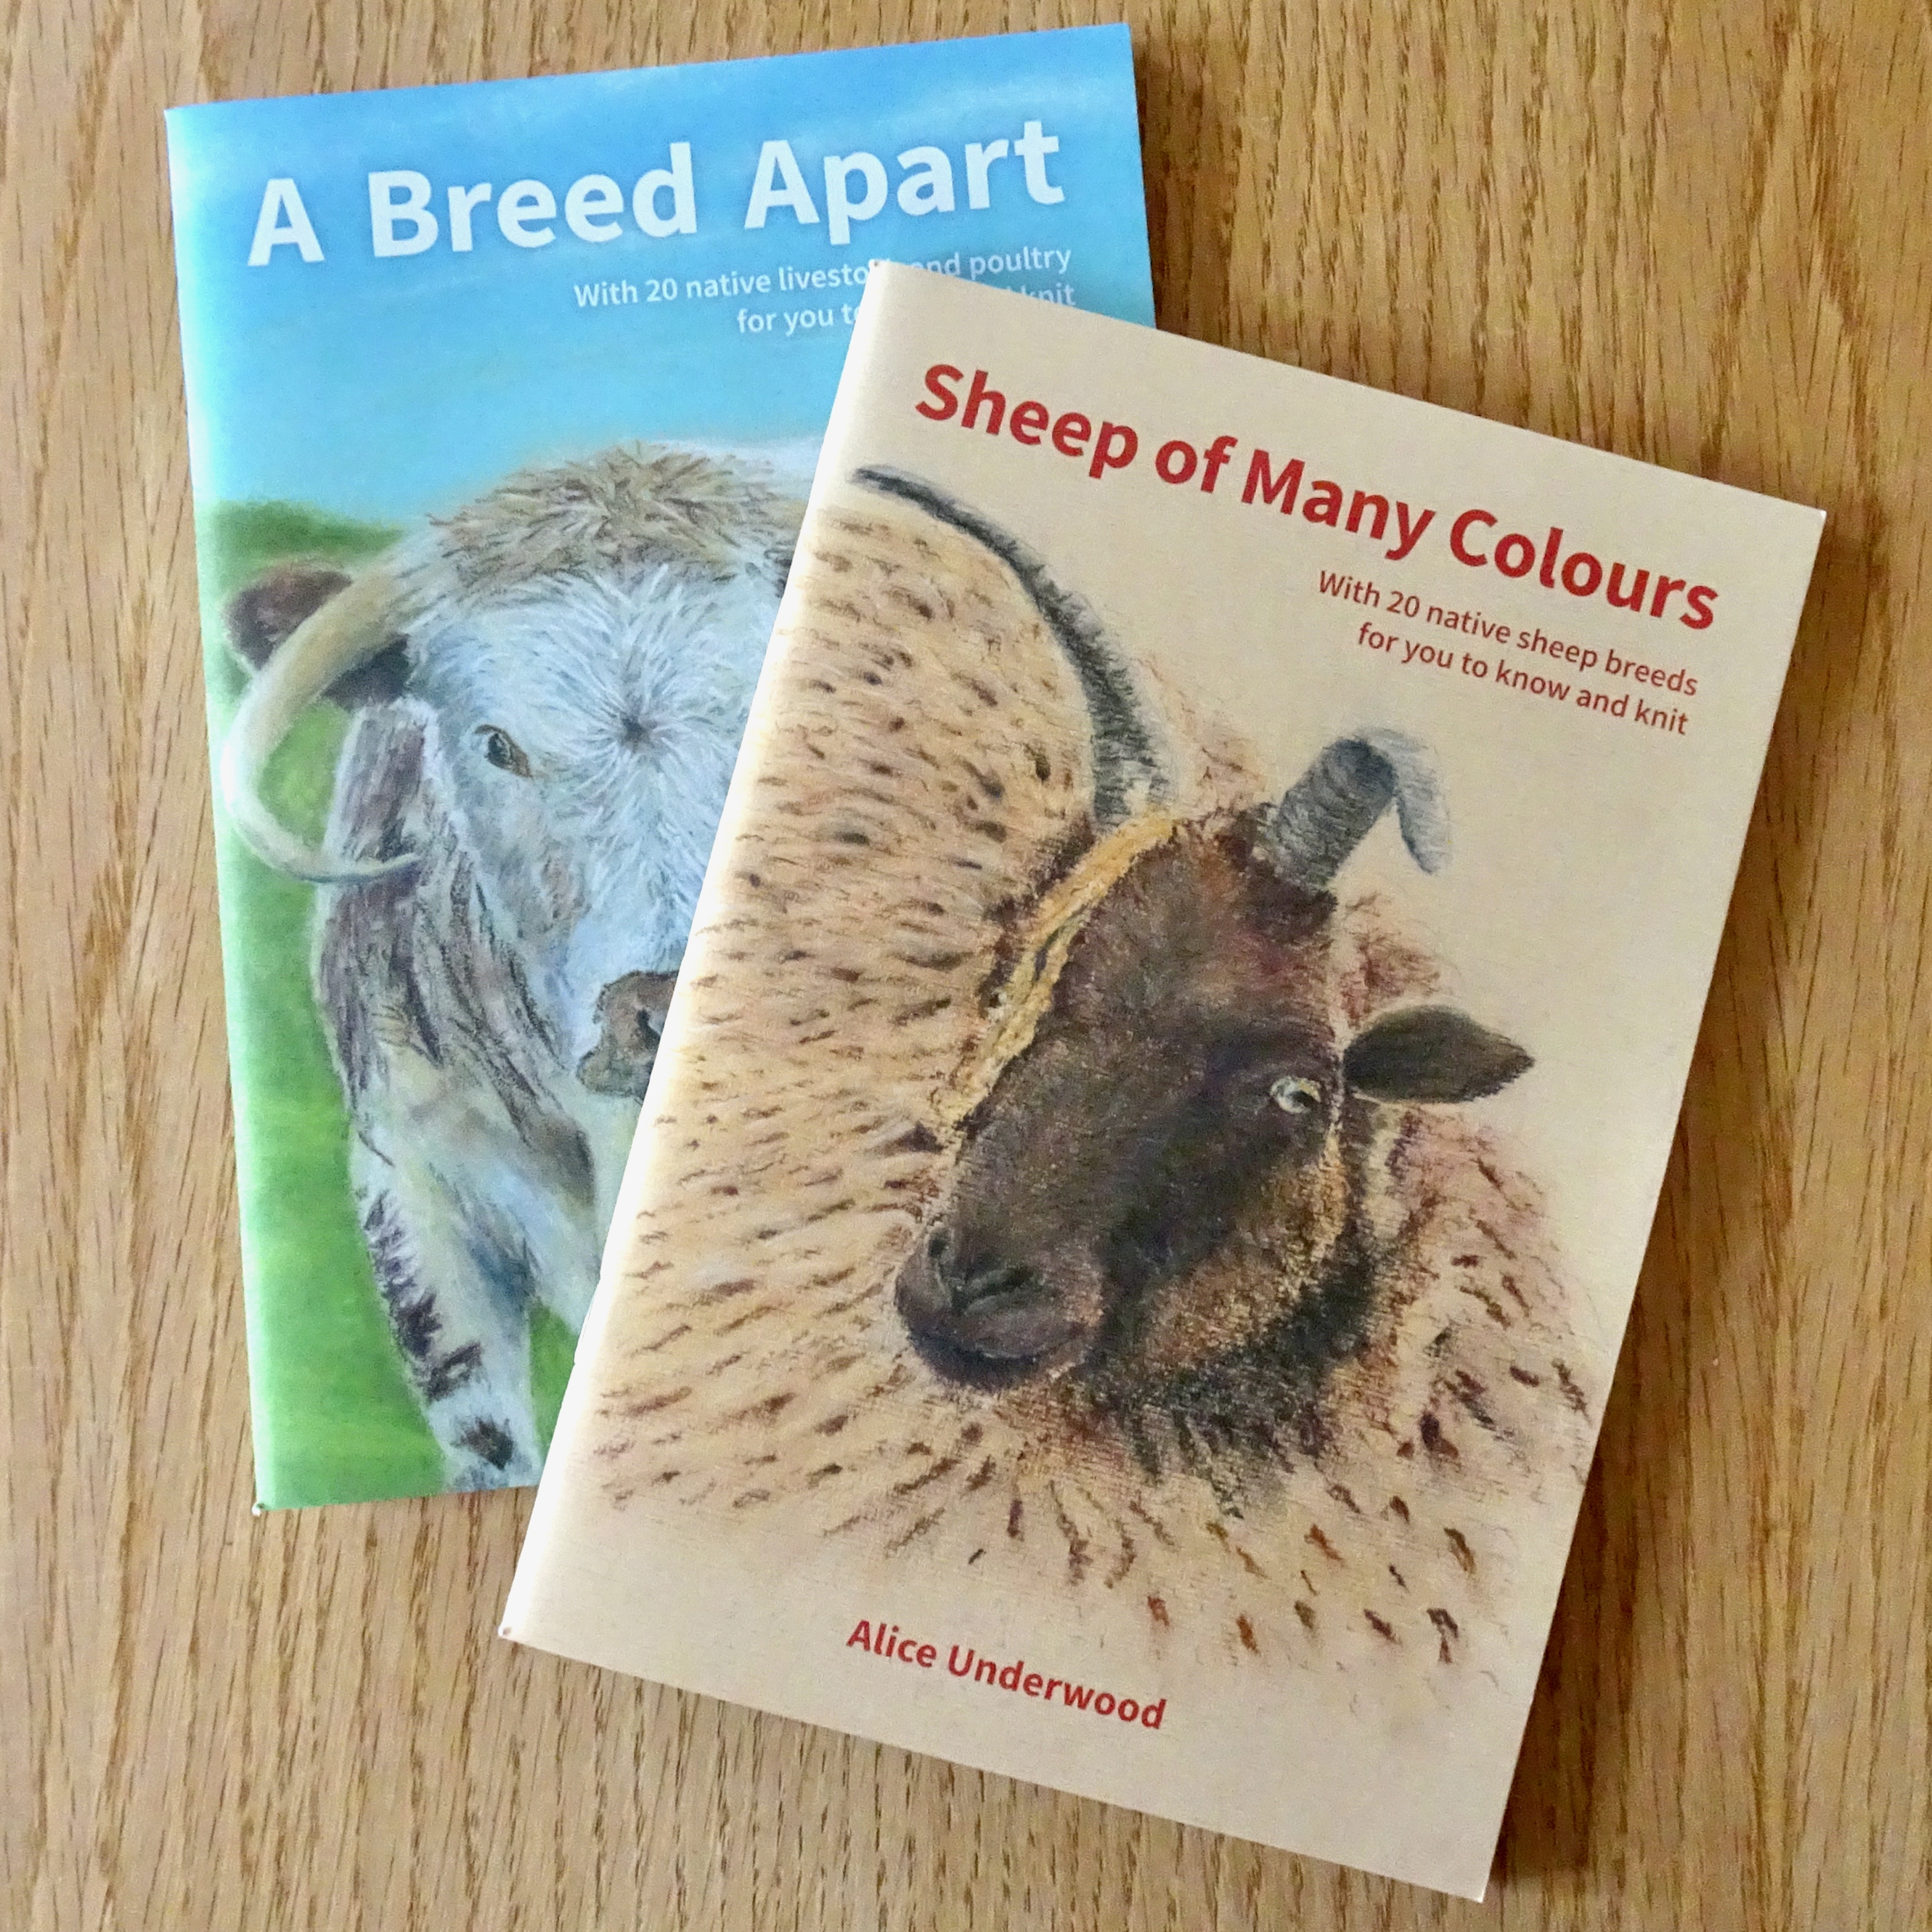 Book of Knitting Charts for British Breeds